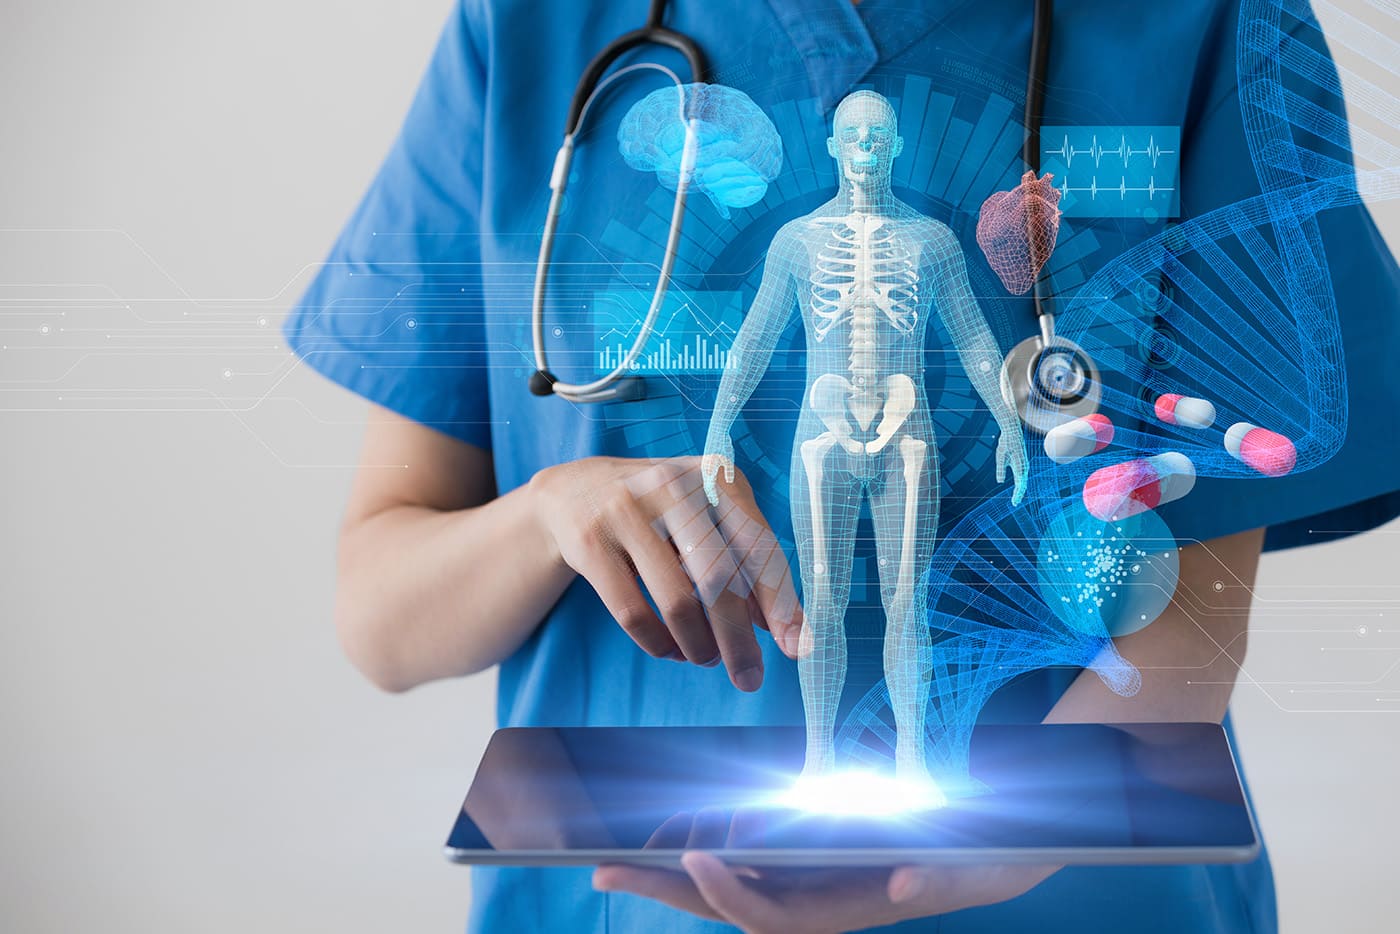 How AI And Machine Learning Will Impact The Future Of Healthcare | Bernard Marr